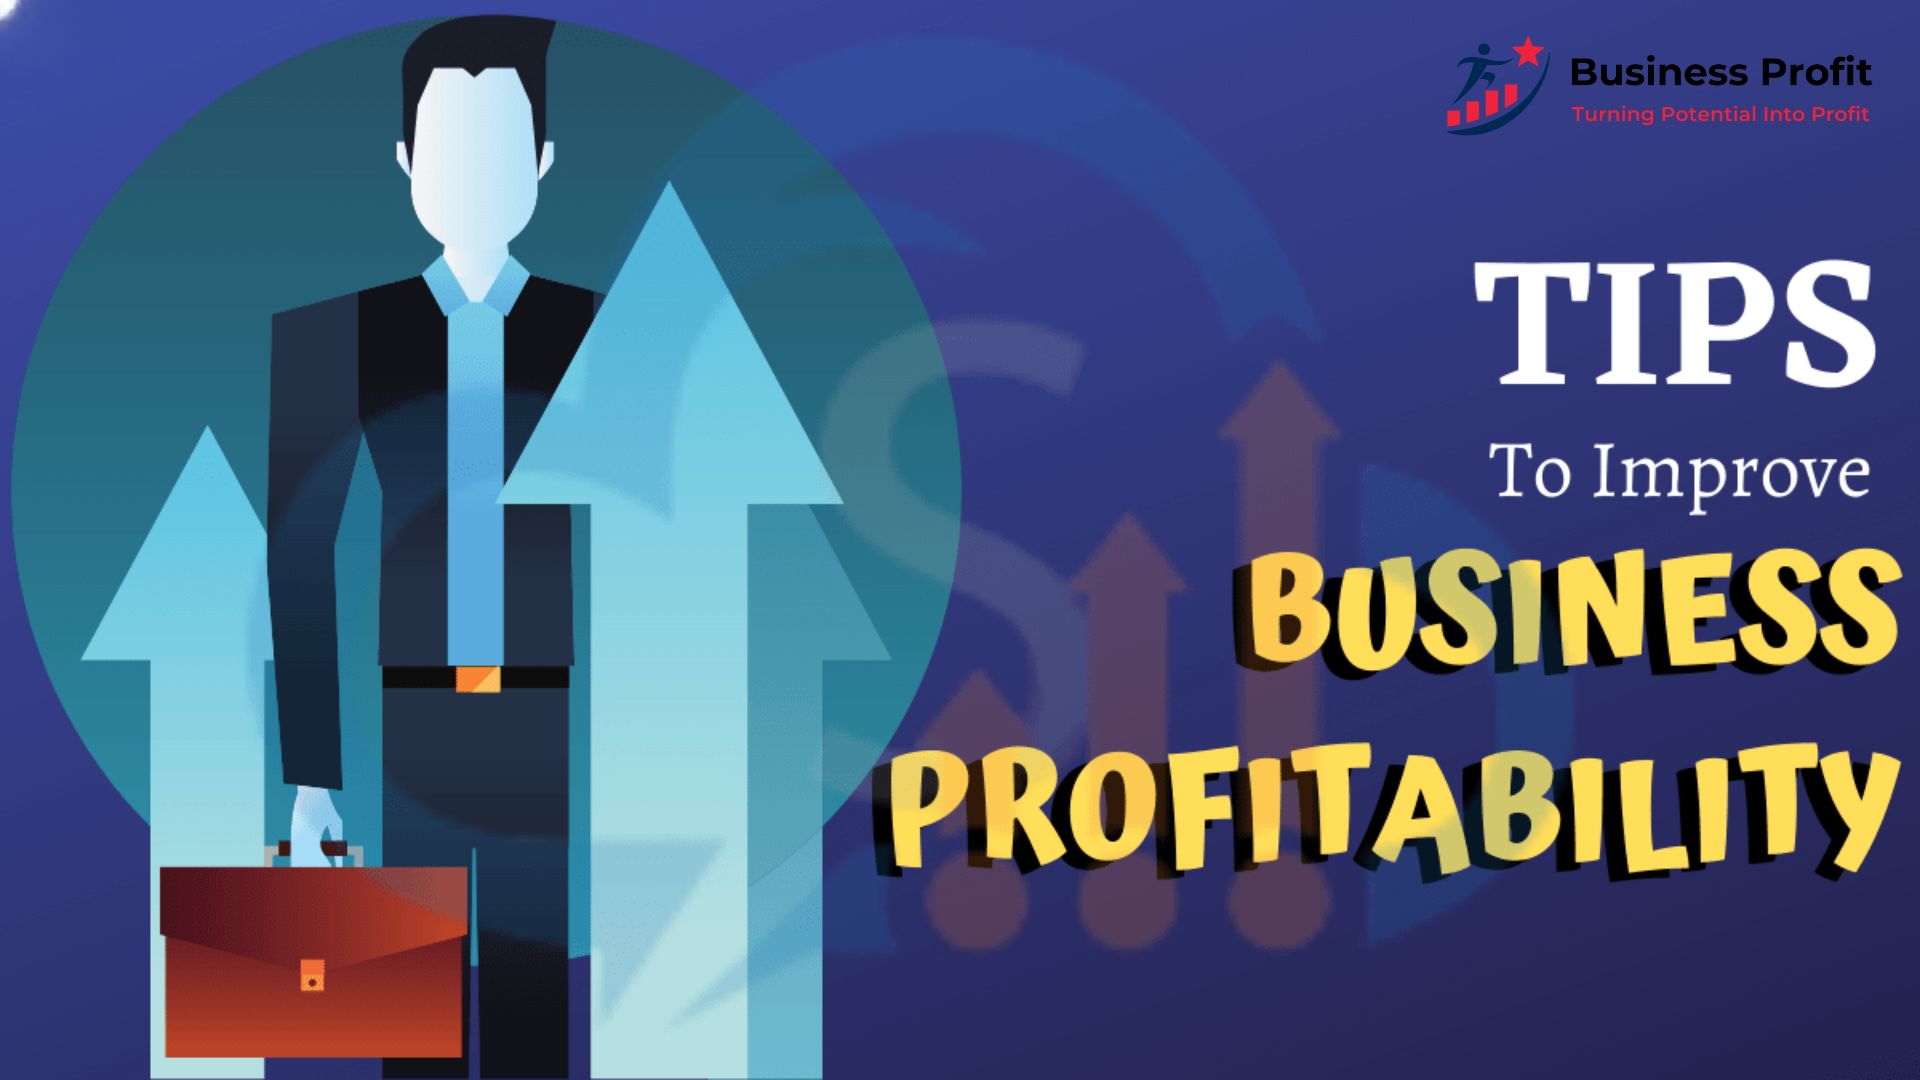 Business Profitability: Better Five Strategic Steps for Sustainable Growth